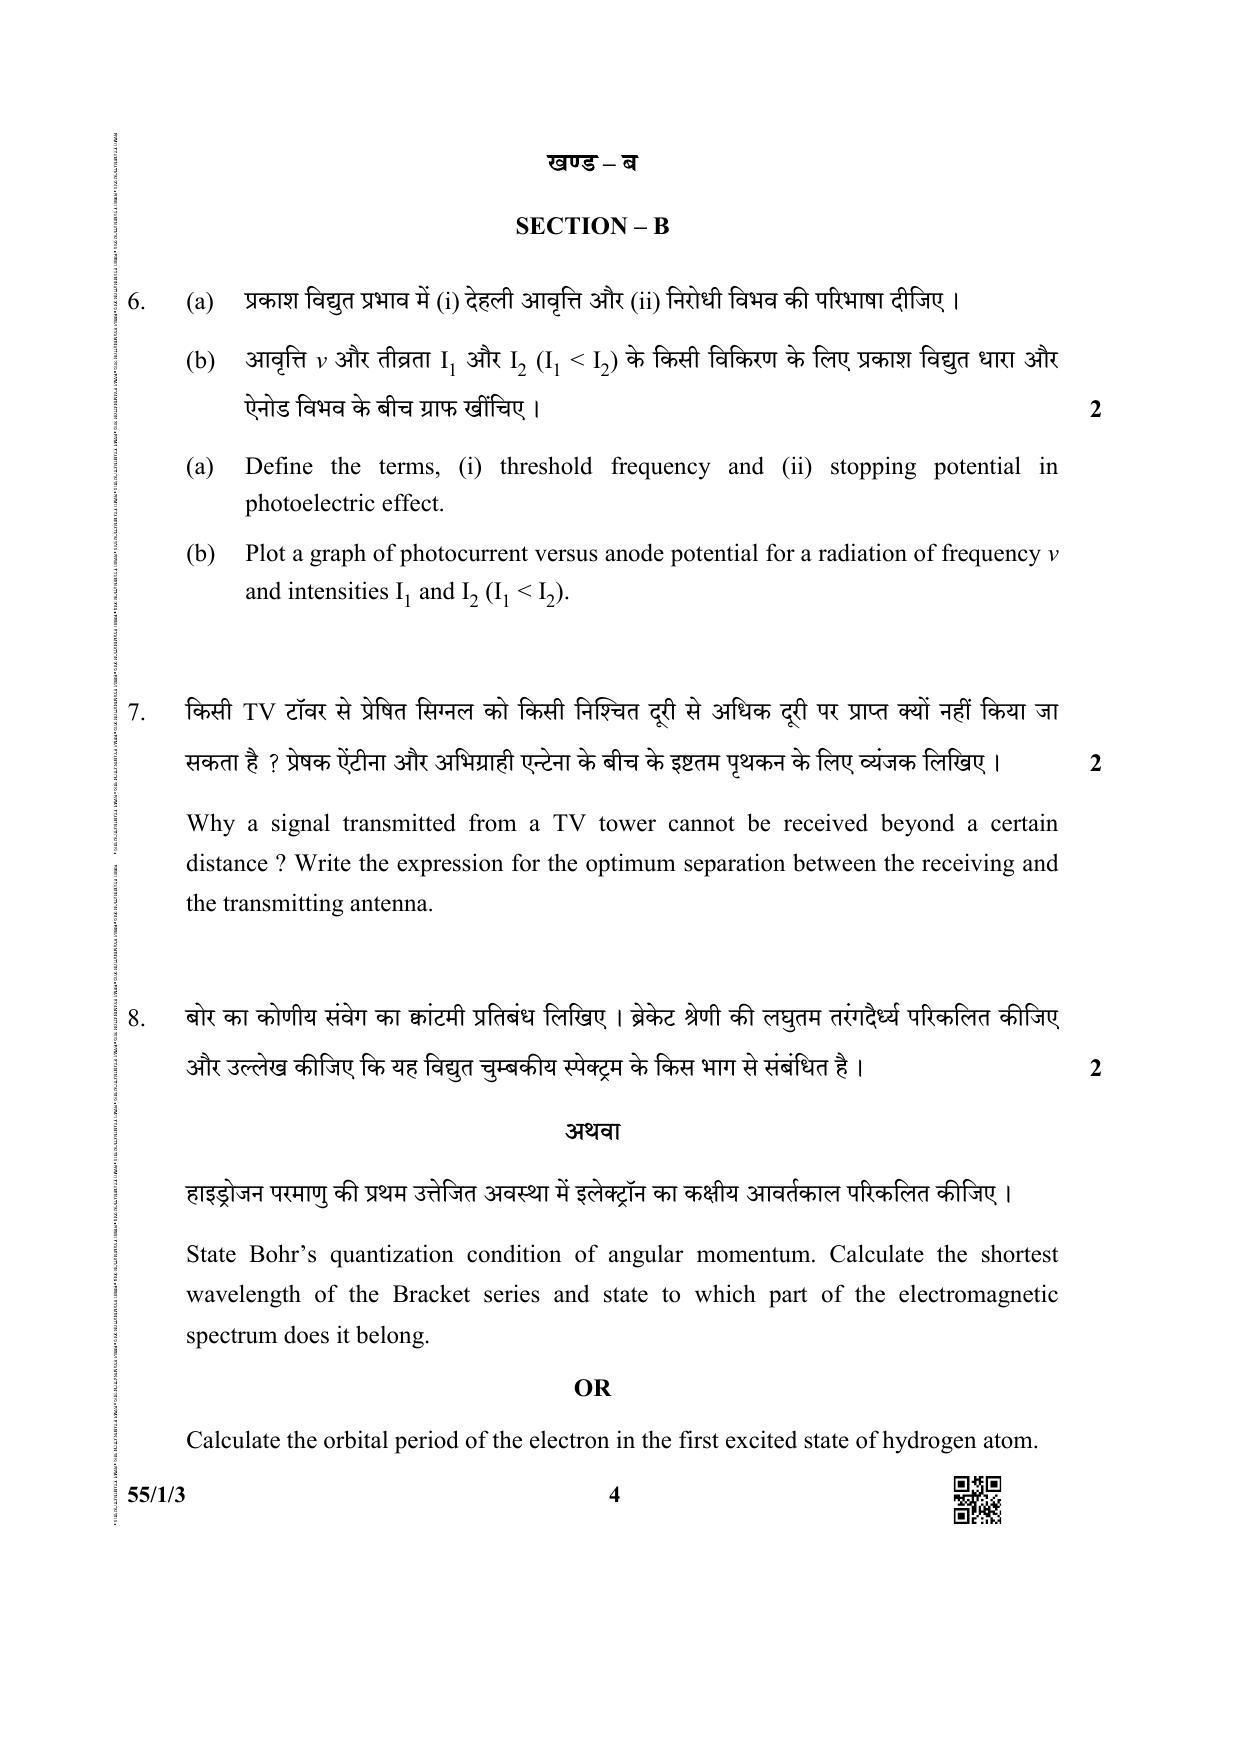 CBSE Class 12 55-1-3 (Physics) 2019 Question Paper - Page 4